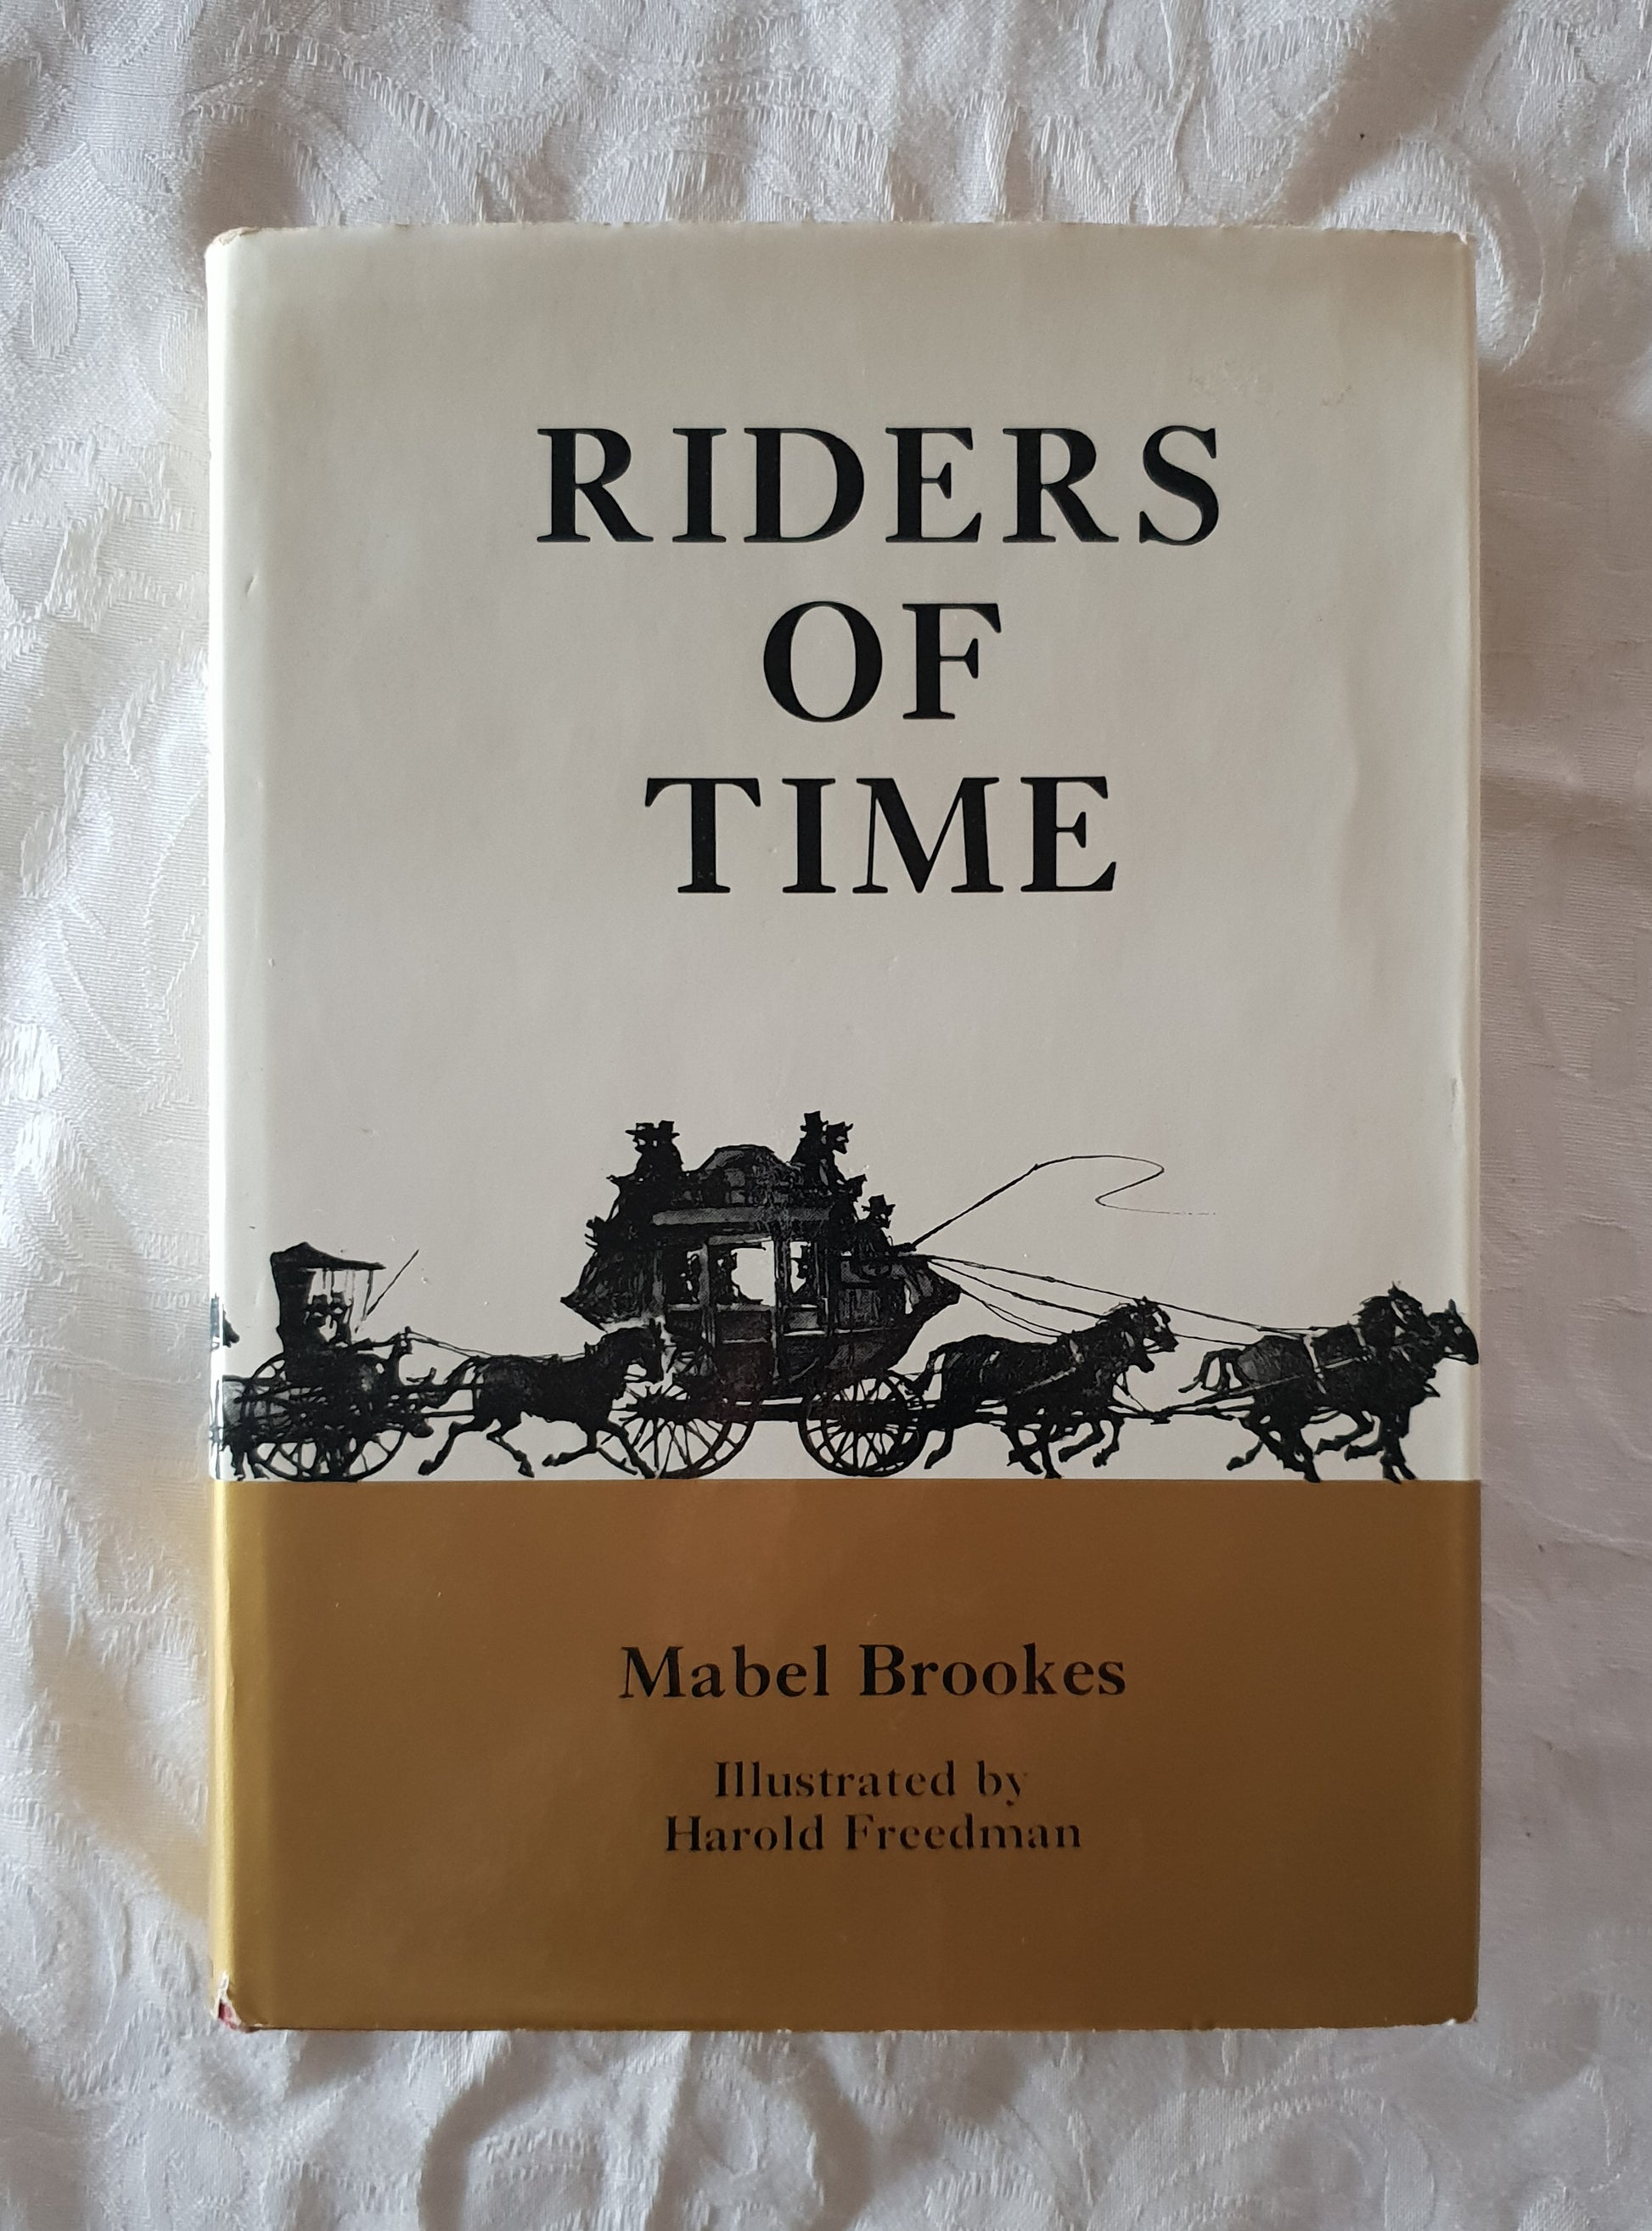 Riders Of Time  by Mabel Brookes with Illustrations by Harold Freedman